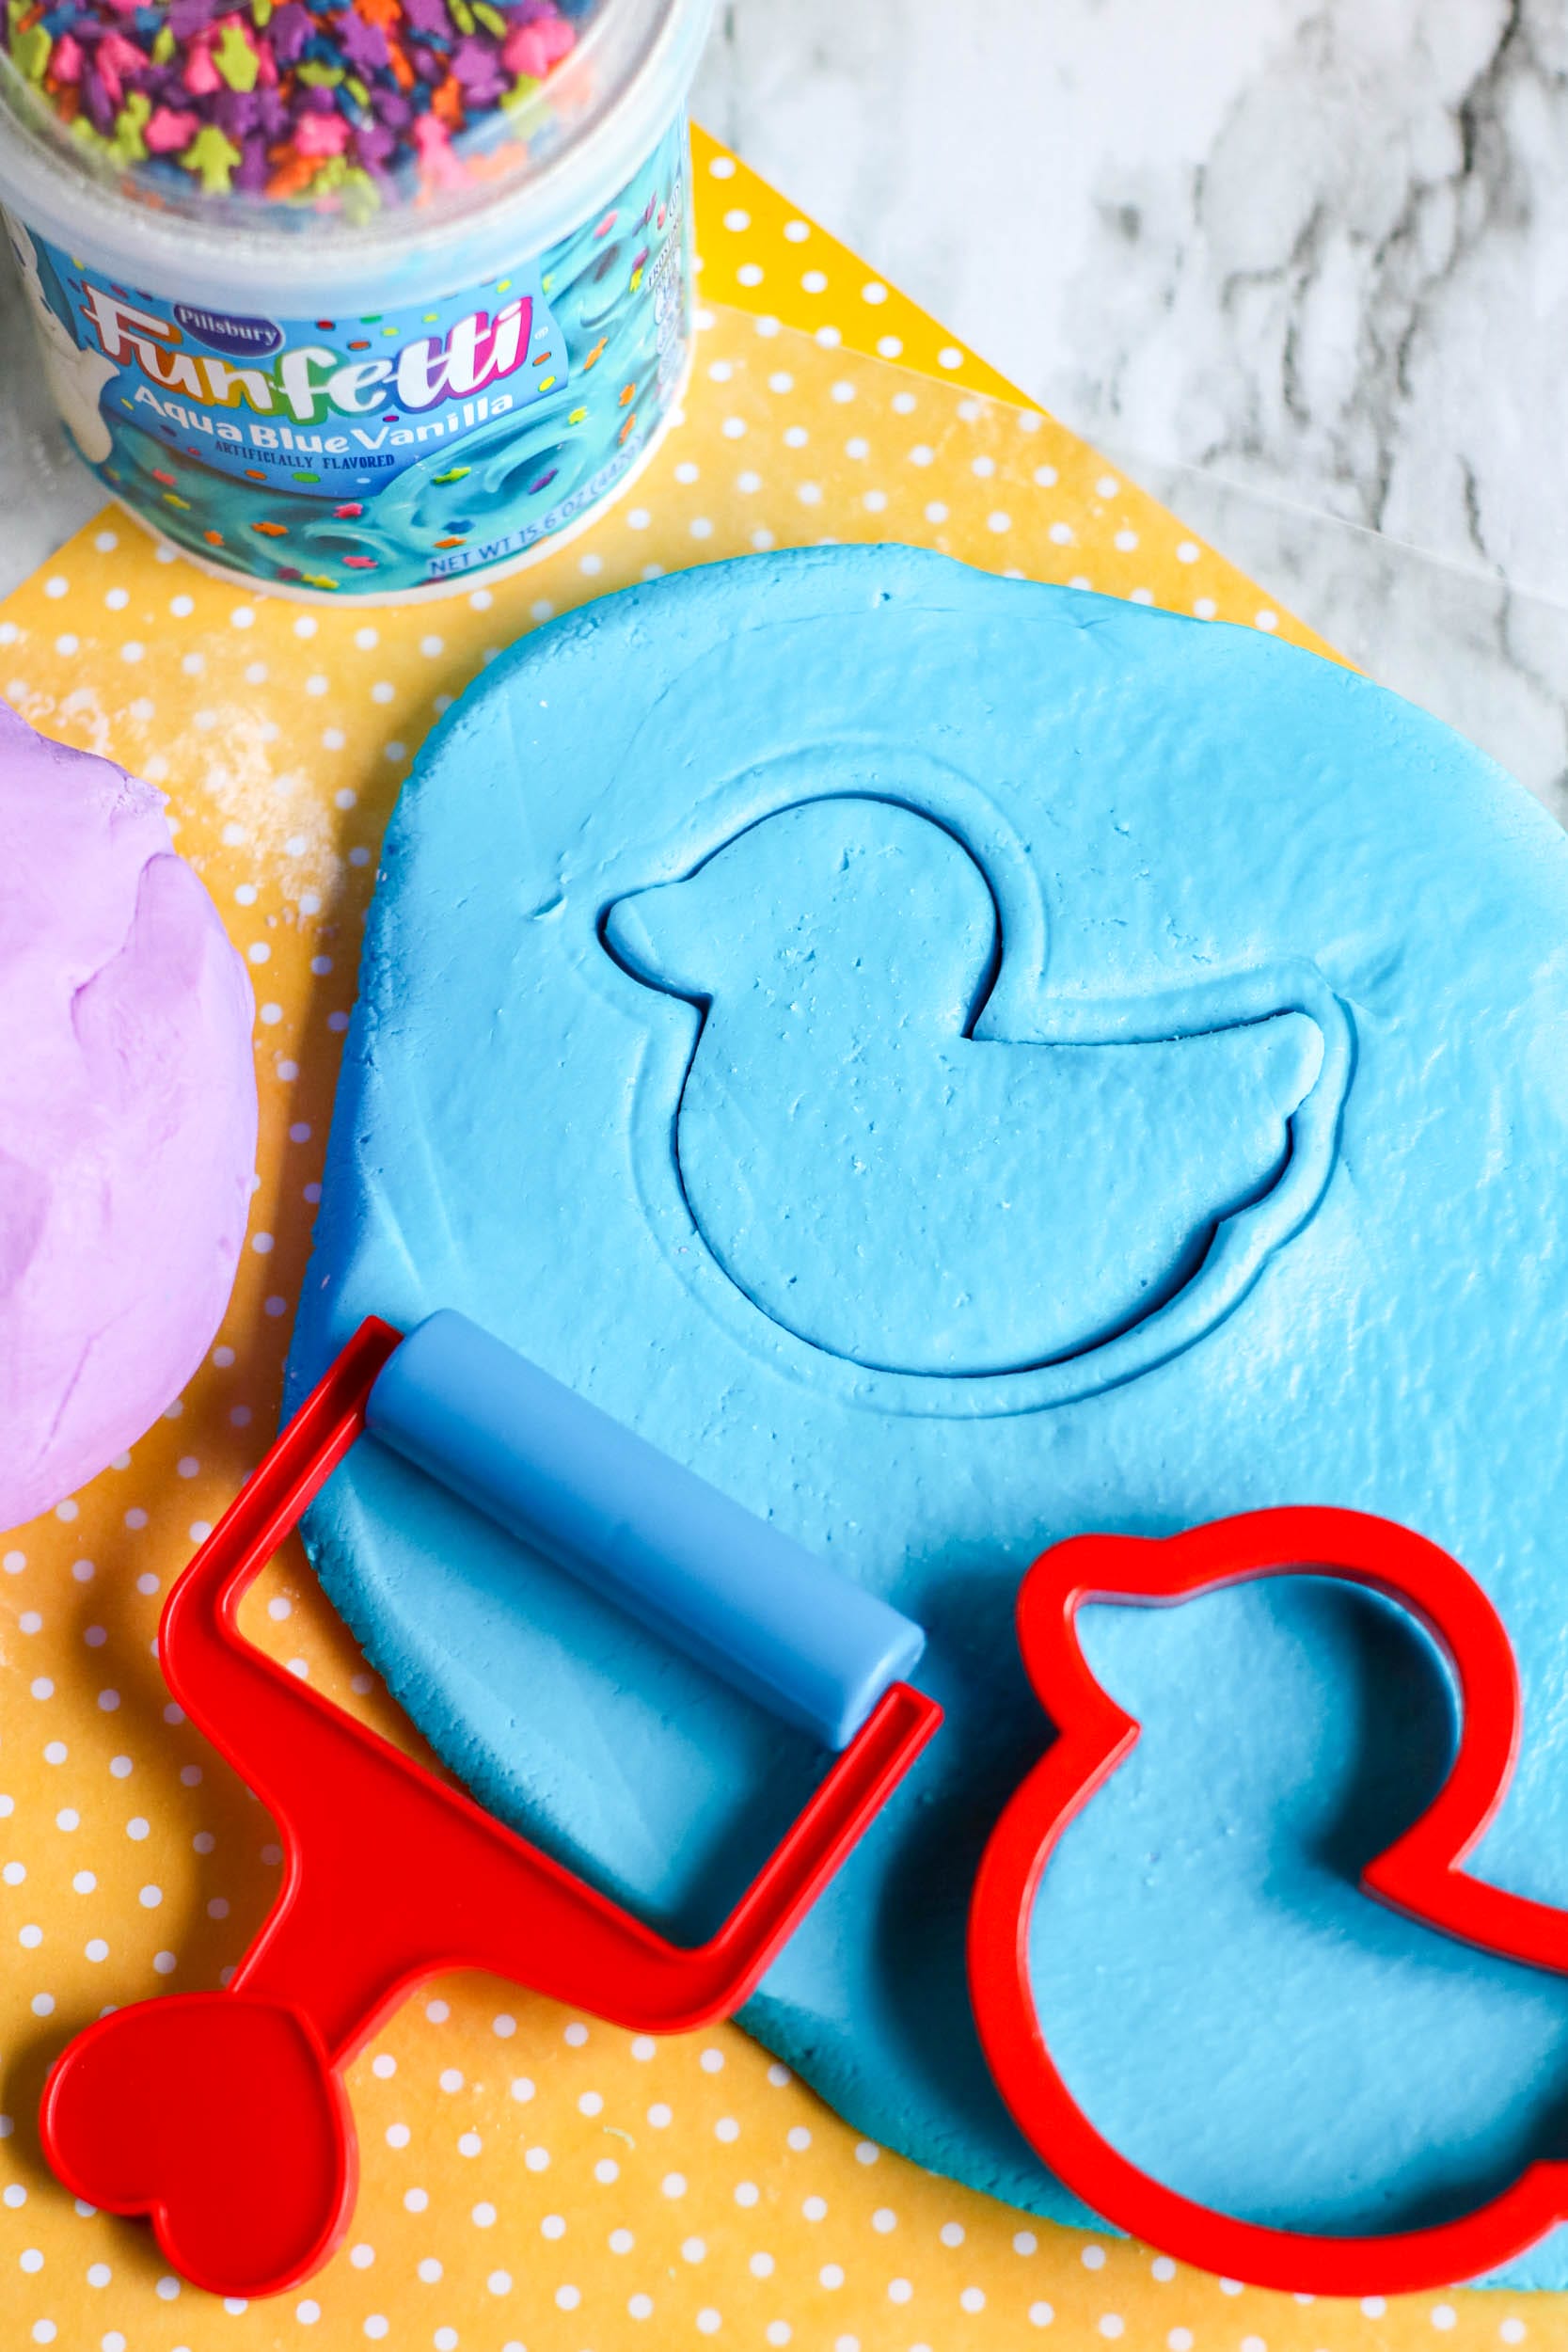 How to Make Edible Play Dough with Frosting - The Craft-at-Home Family